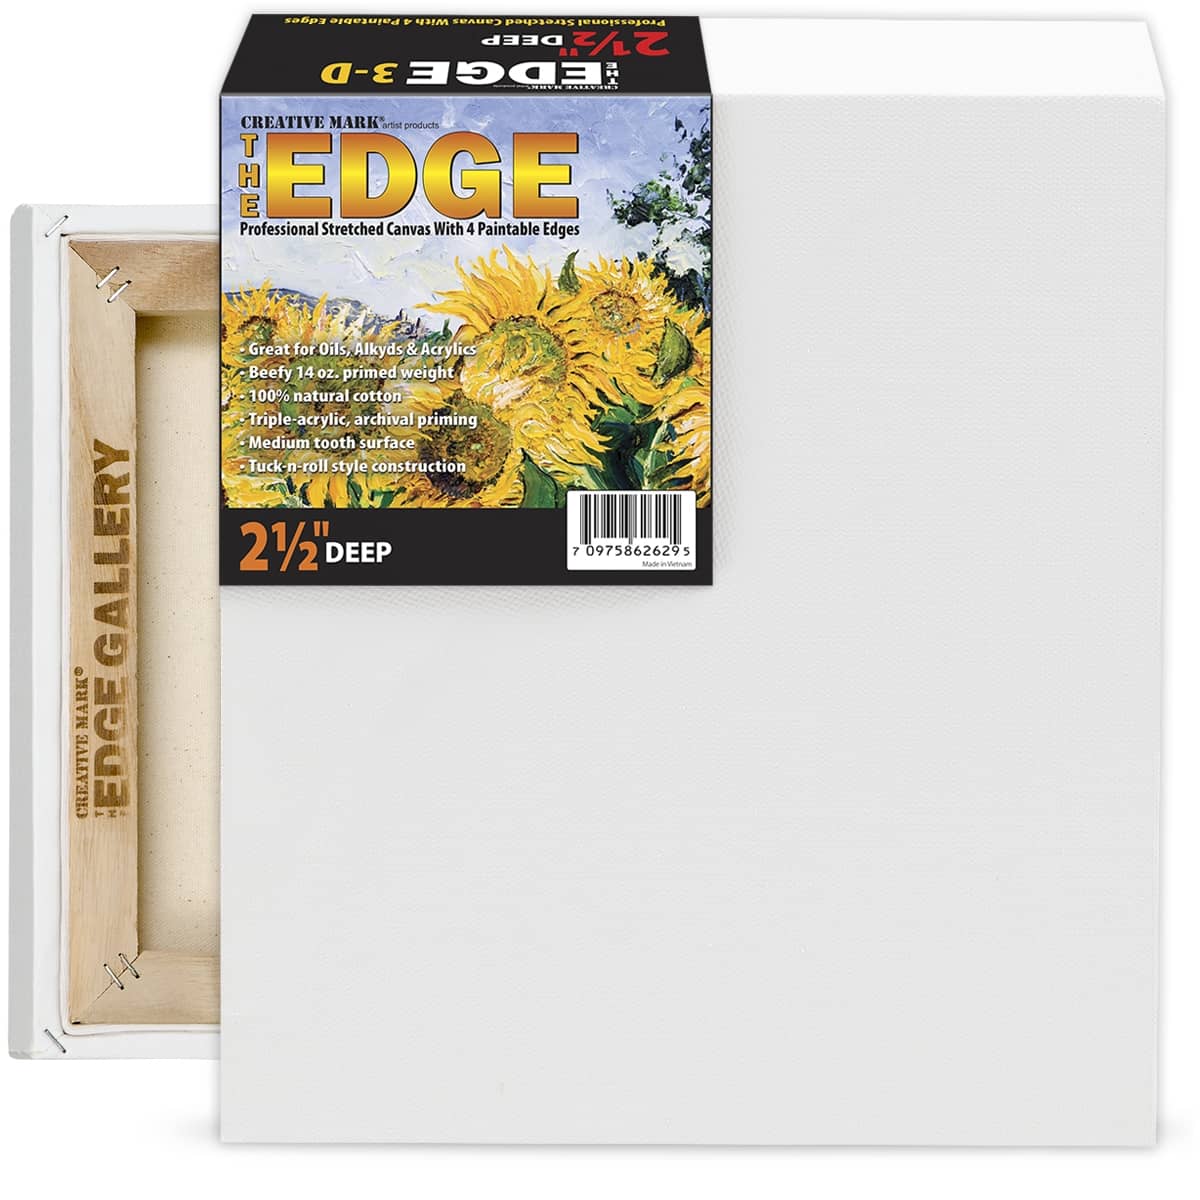 The Edge All Media 2-1/2" Deep Cotton Stretched Canvas